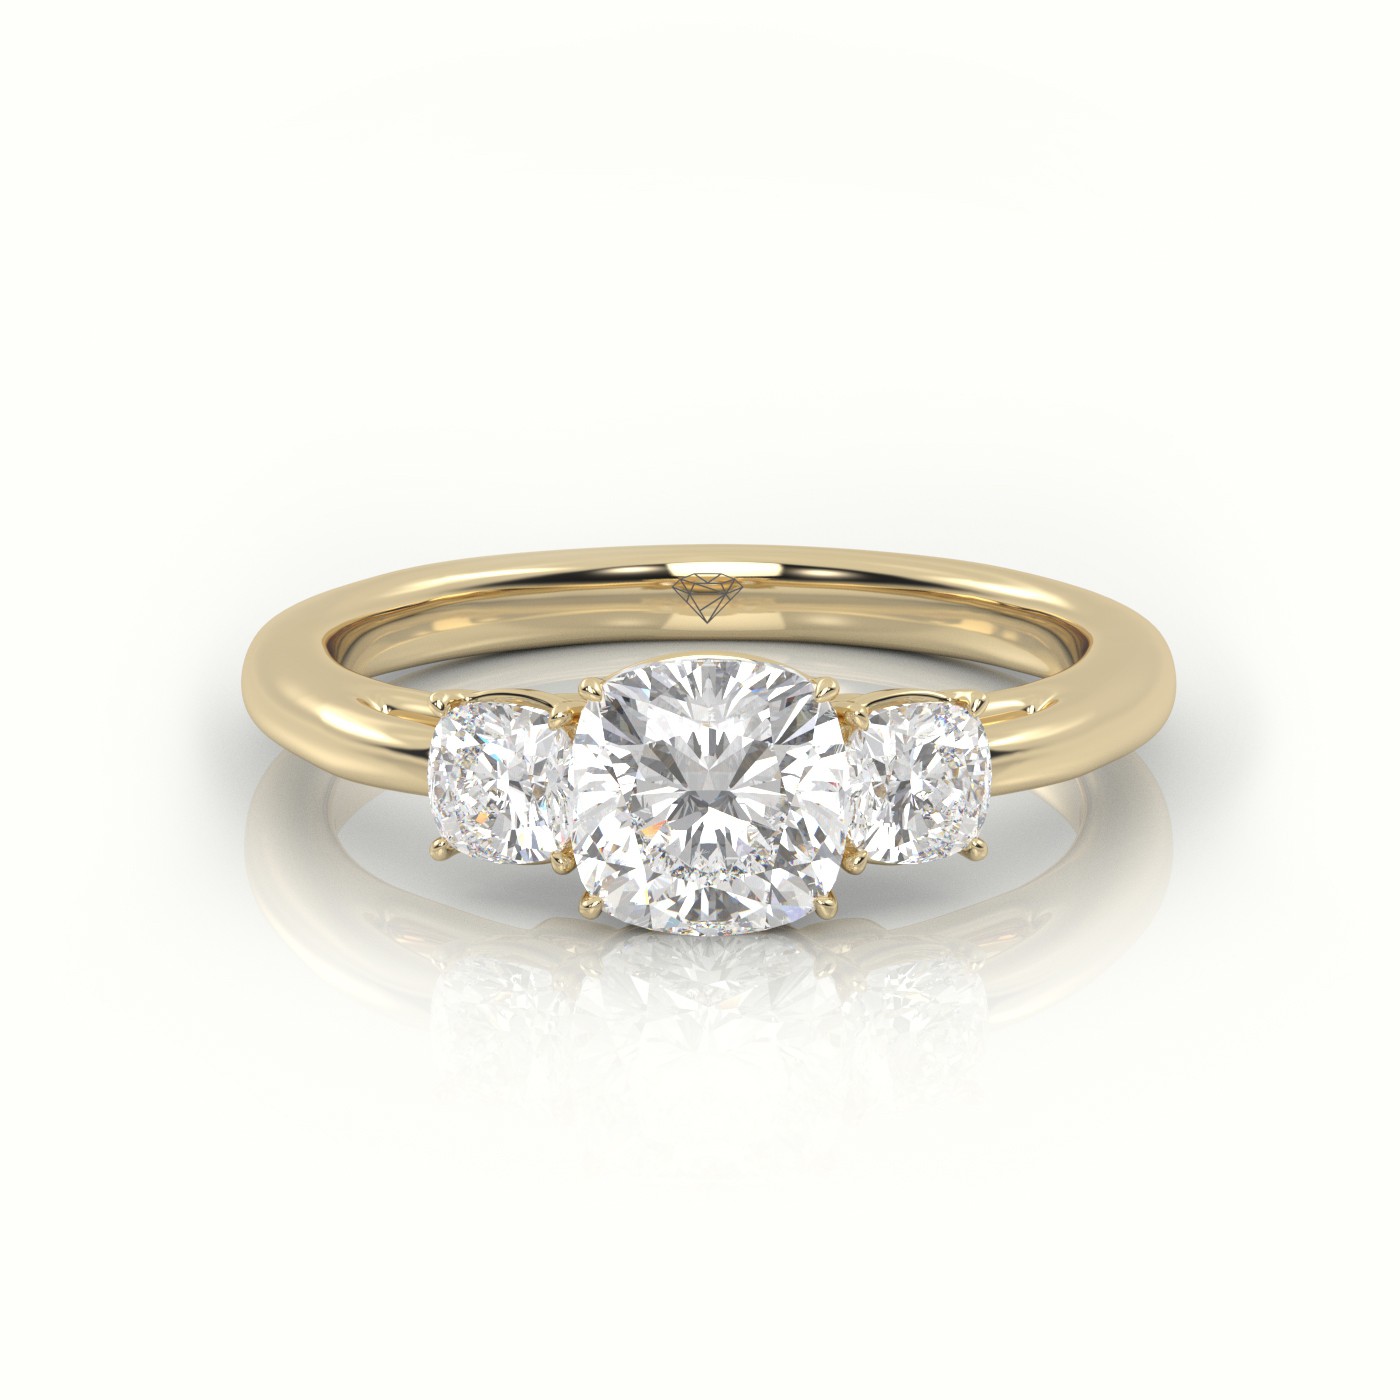 4 CT. T.W. Composite Diamond Multi-Row Engagement Ring in 14K White Gold |  Zales Outlet